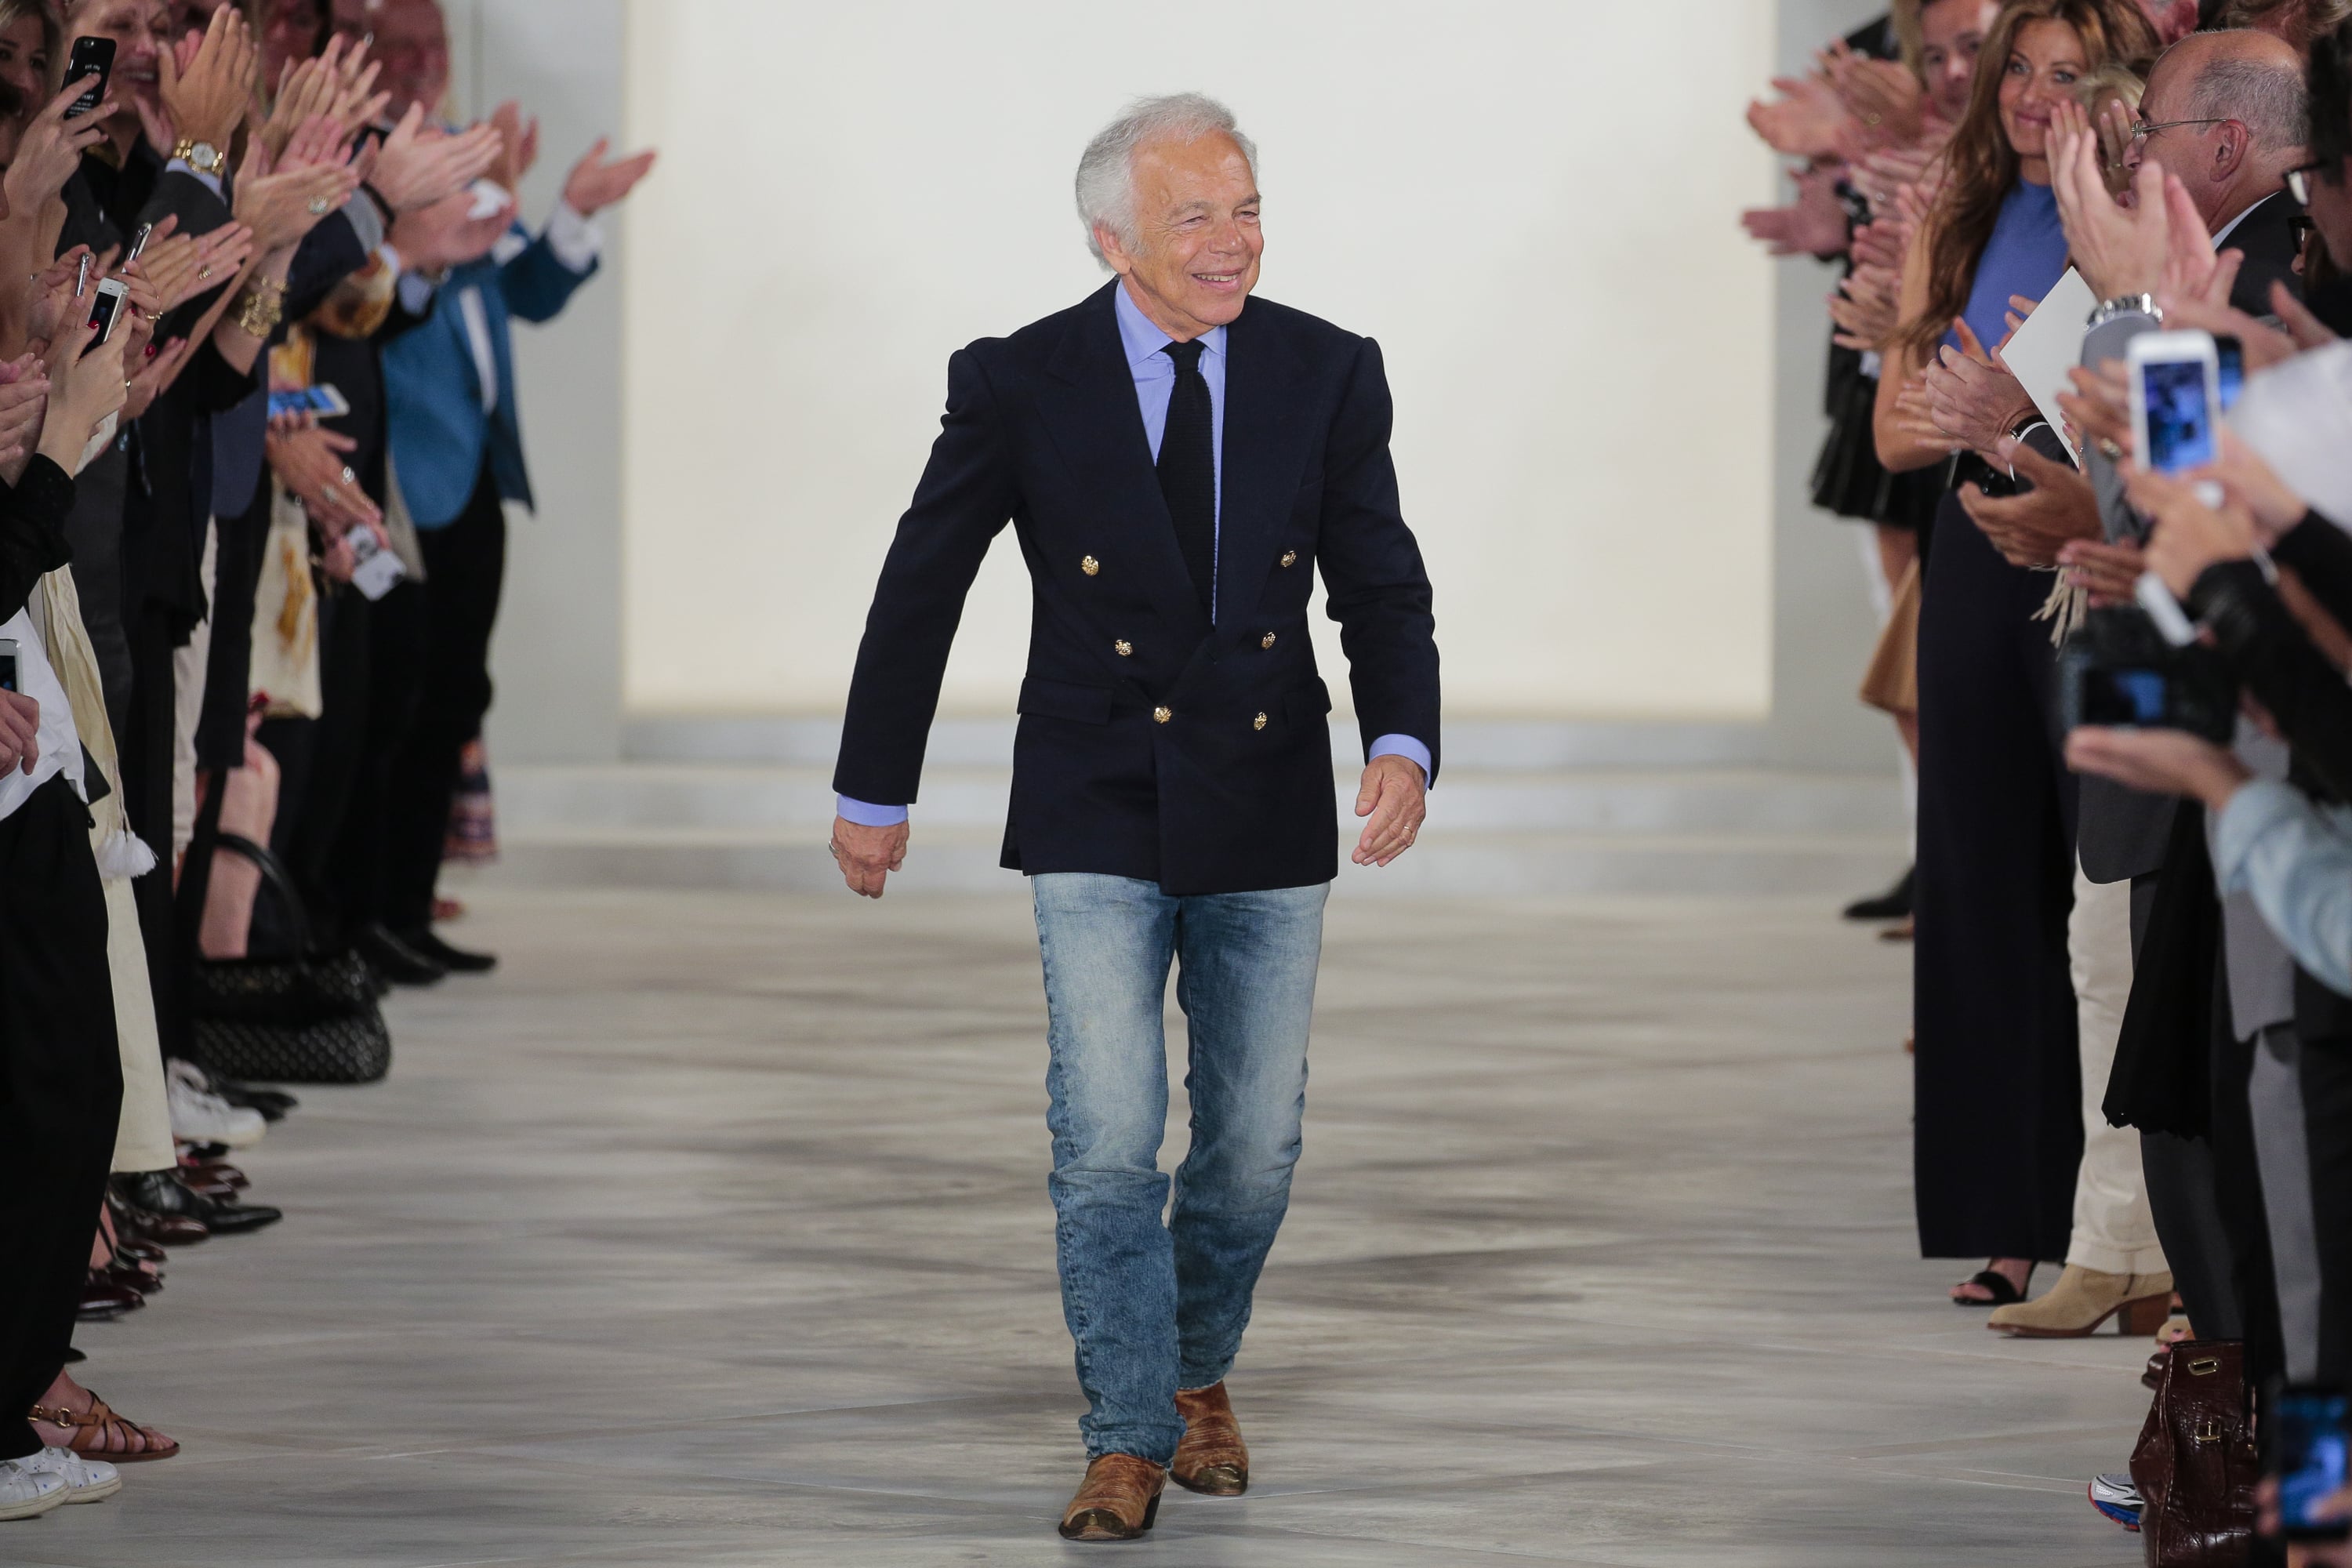 The 5 Best Fashion Quotes From Ralph Lauren's Epic Style.com